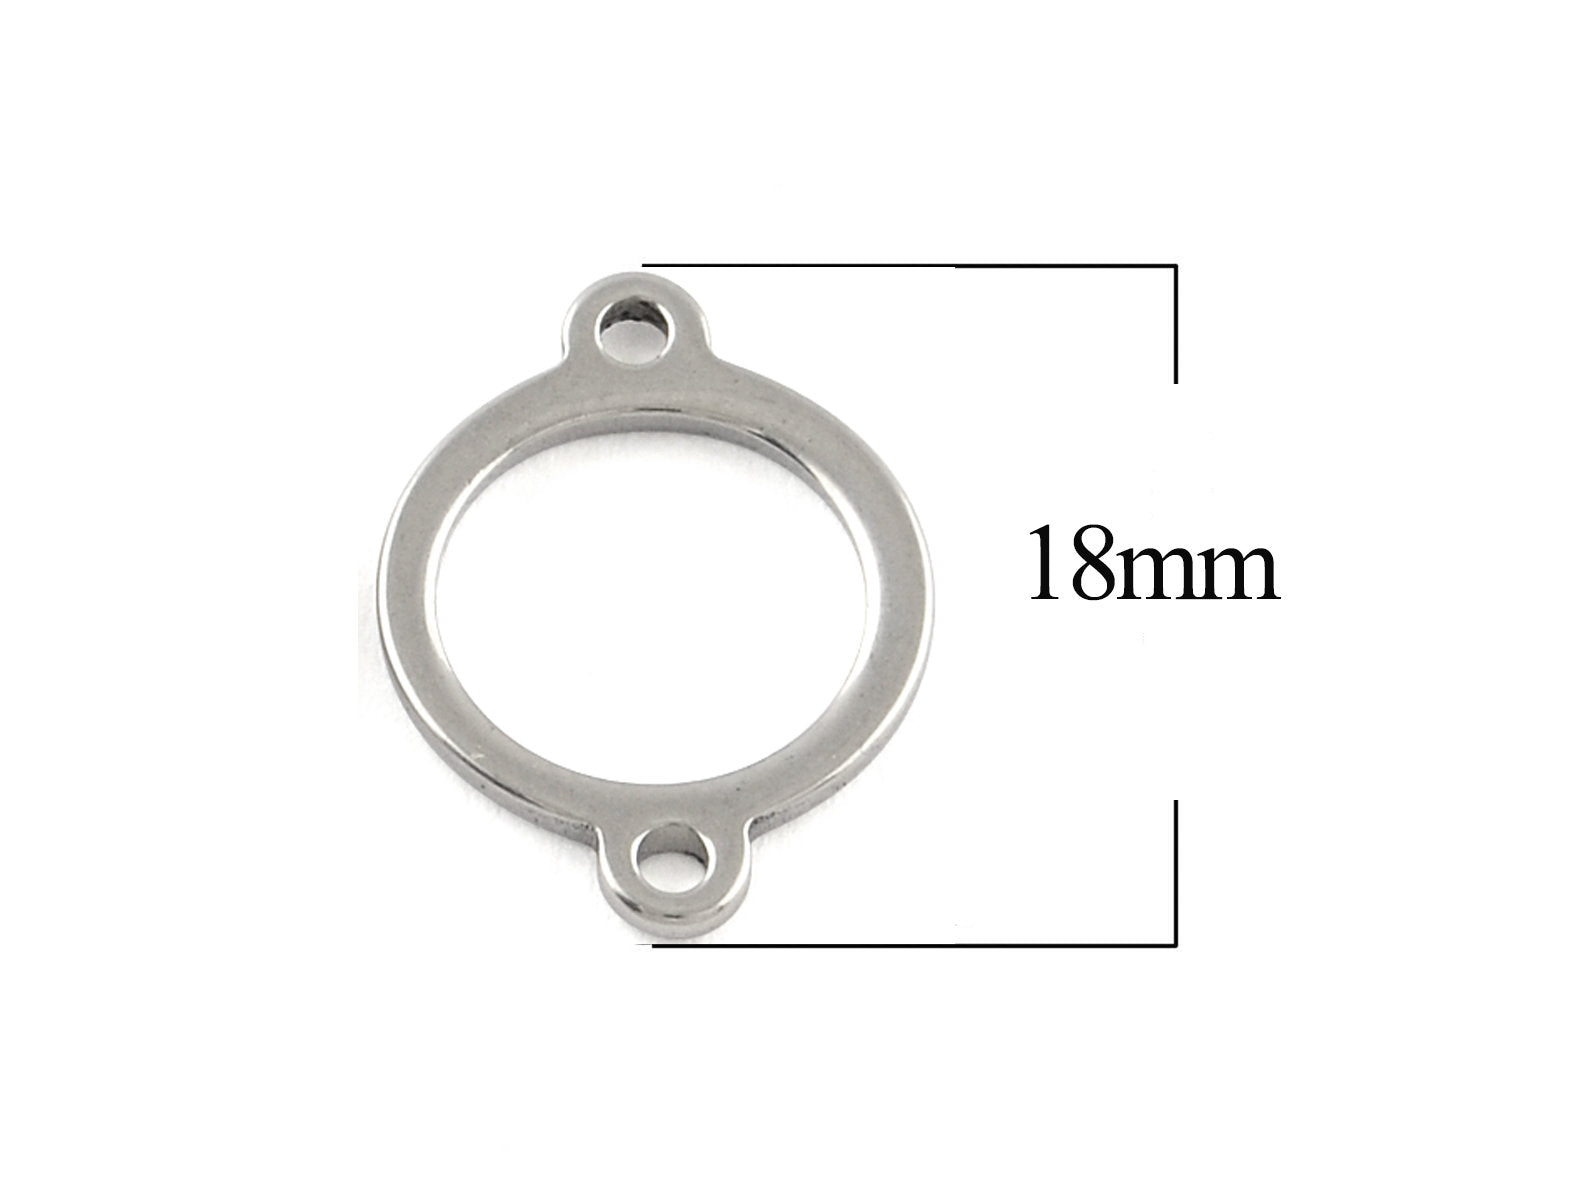 5 Stainless steel round connectors - 2 sizes available